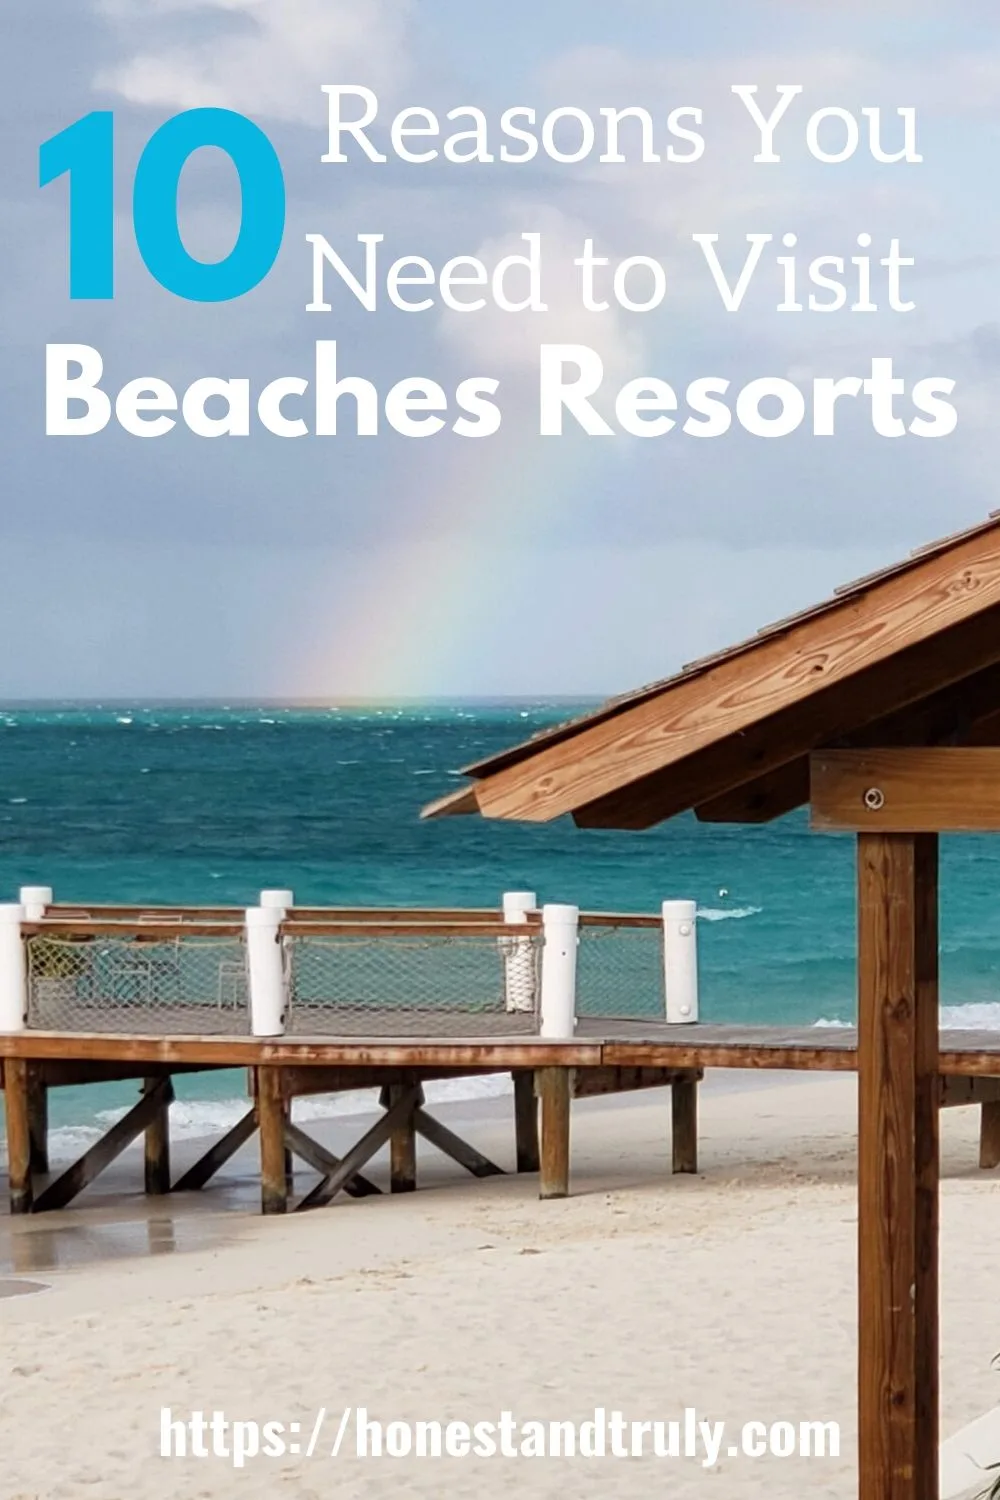 Top Reasons to Say I Do at a Sandals or Beaches Resort from 2 Travel Anywhere - Nashville Bride Guide